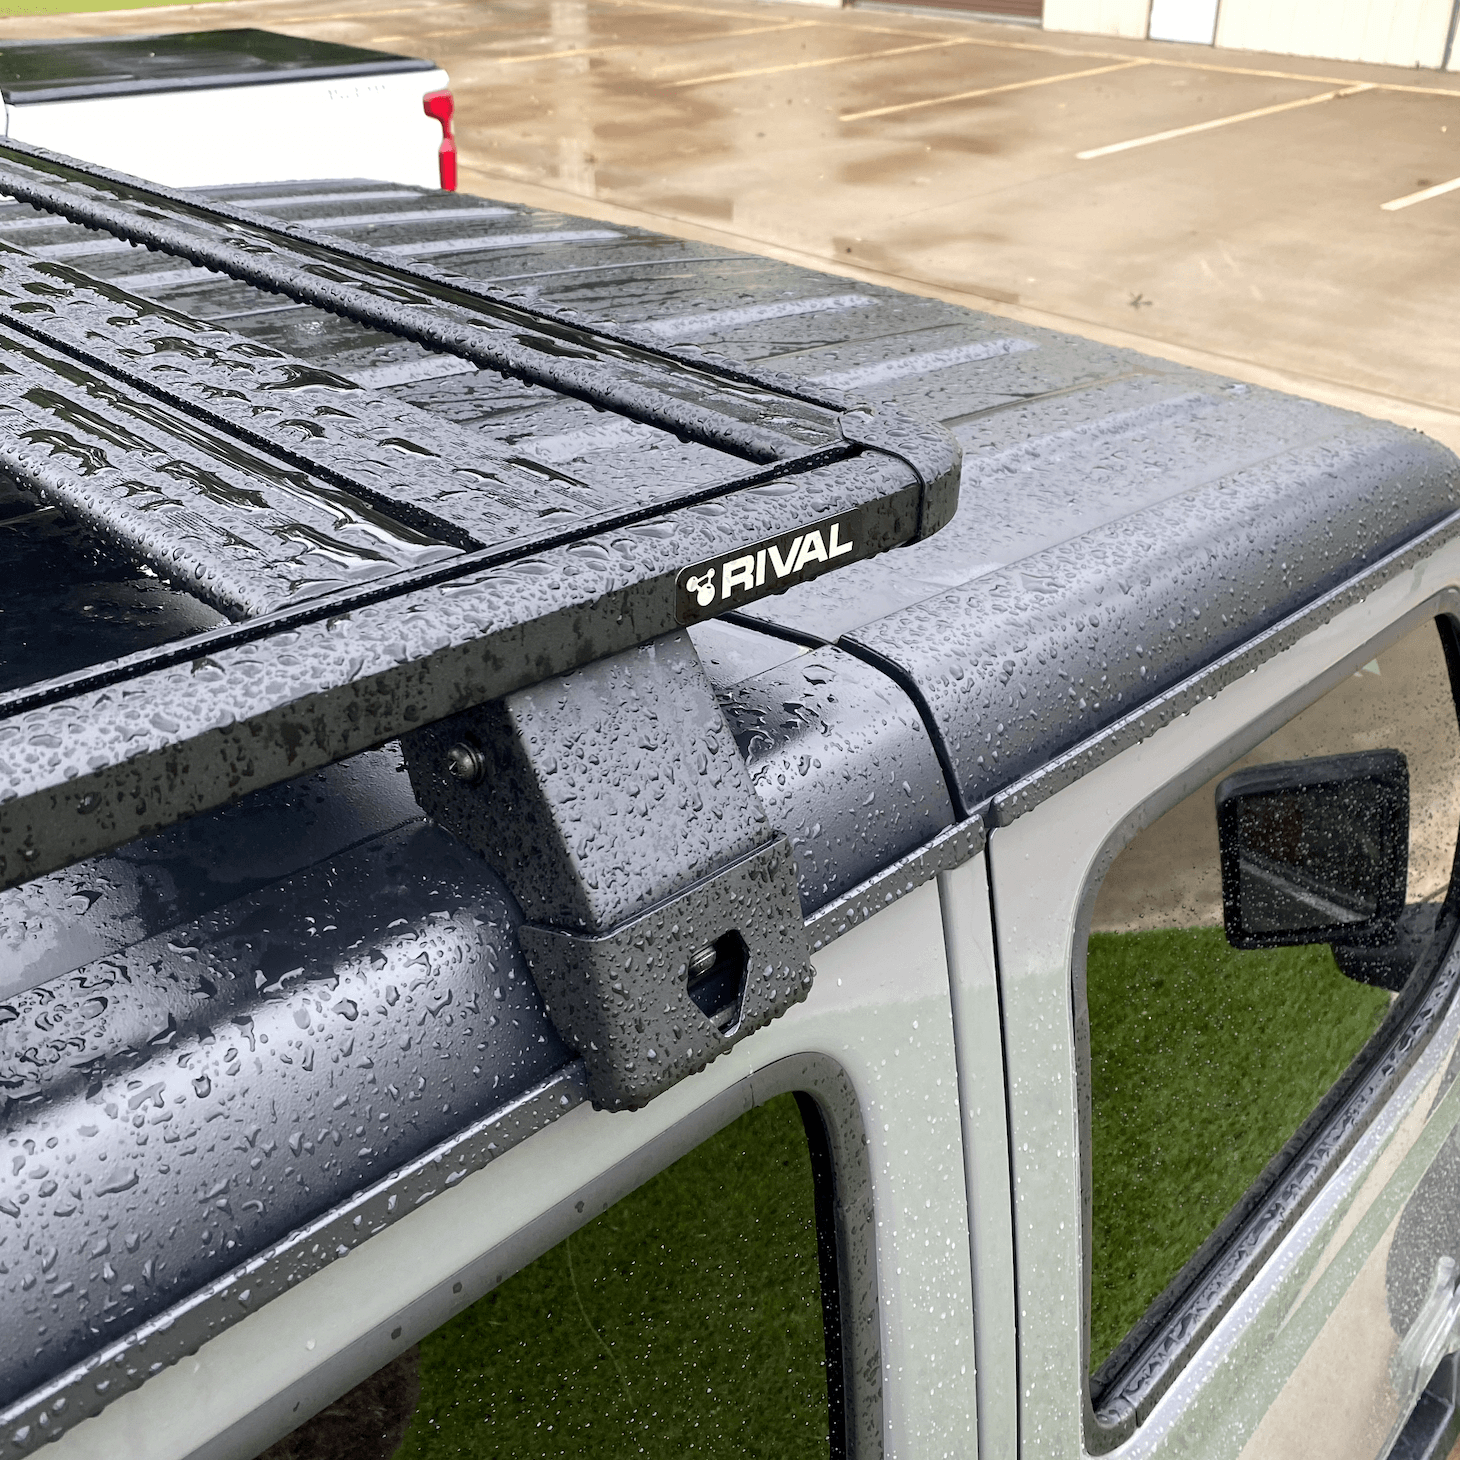 Quality Roof Racks for Trucks and Jeeps